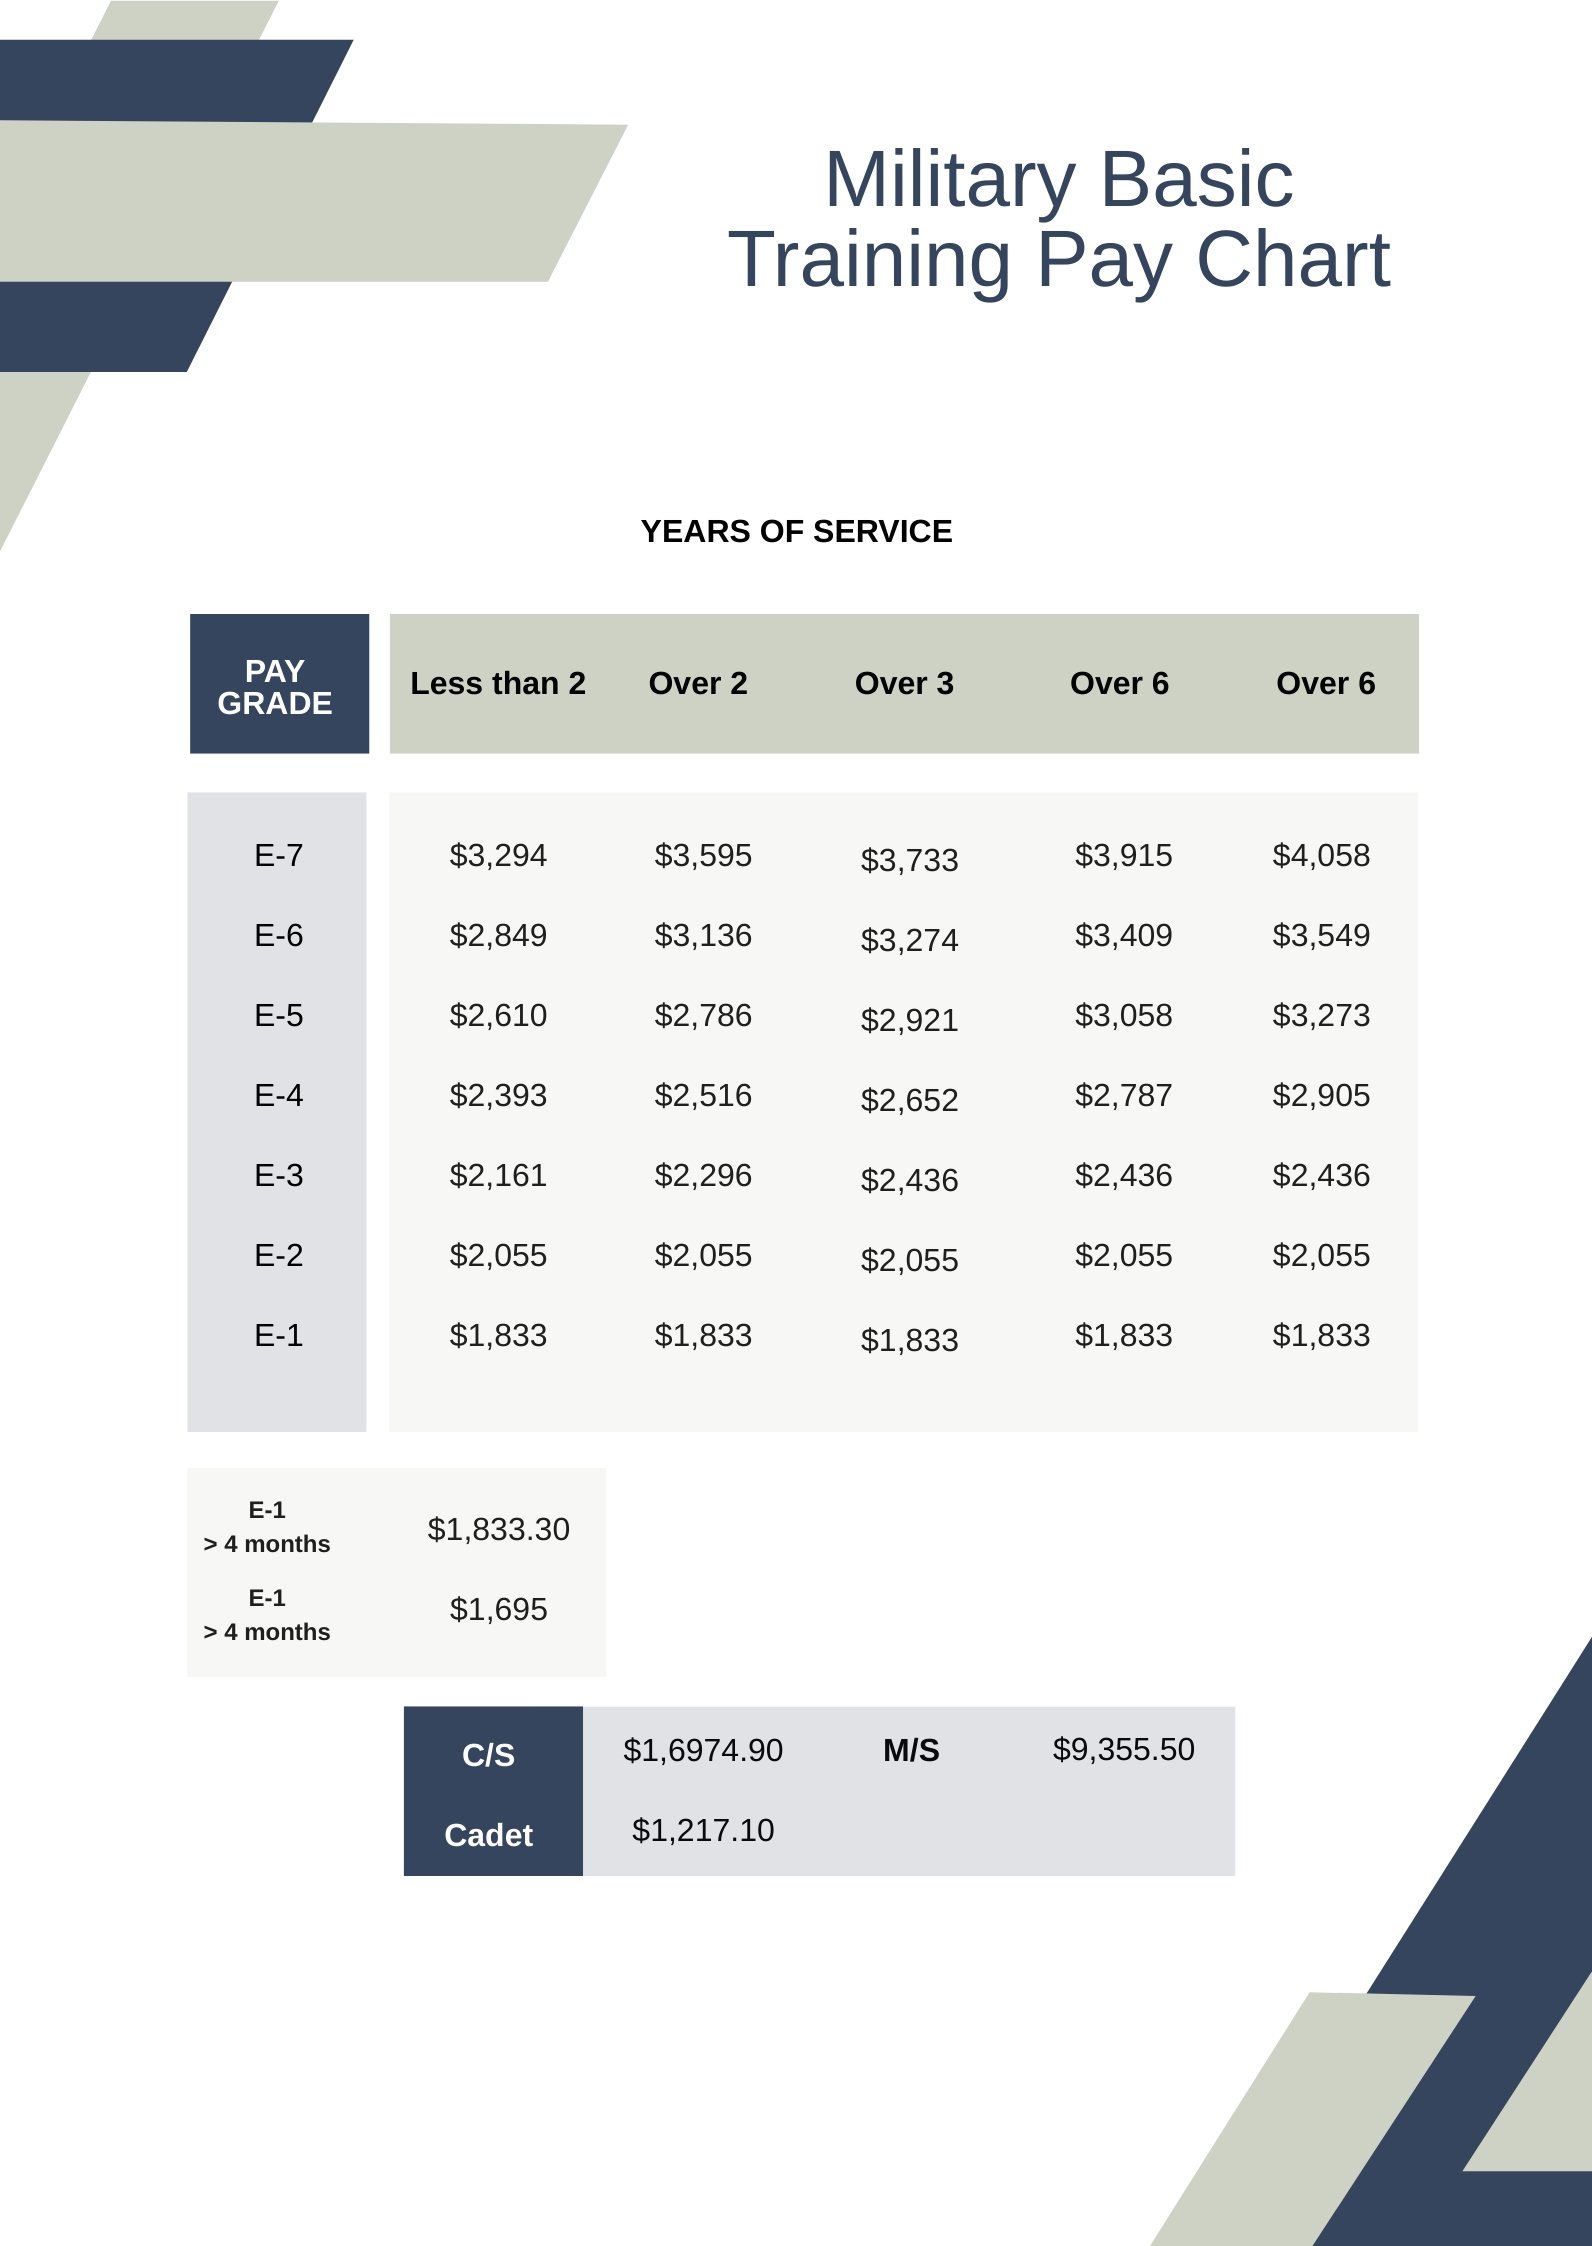 Military Basic Training Pay Chart in PDF Download